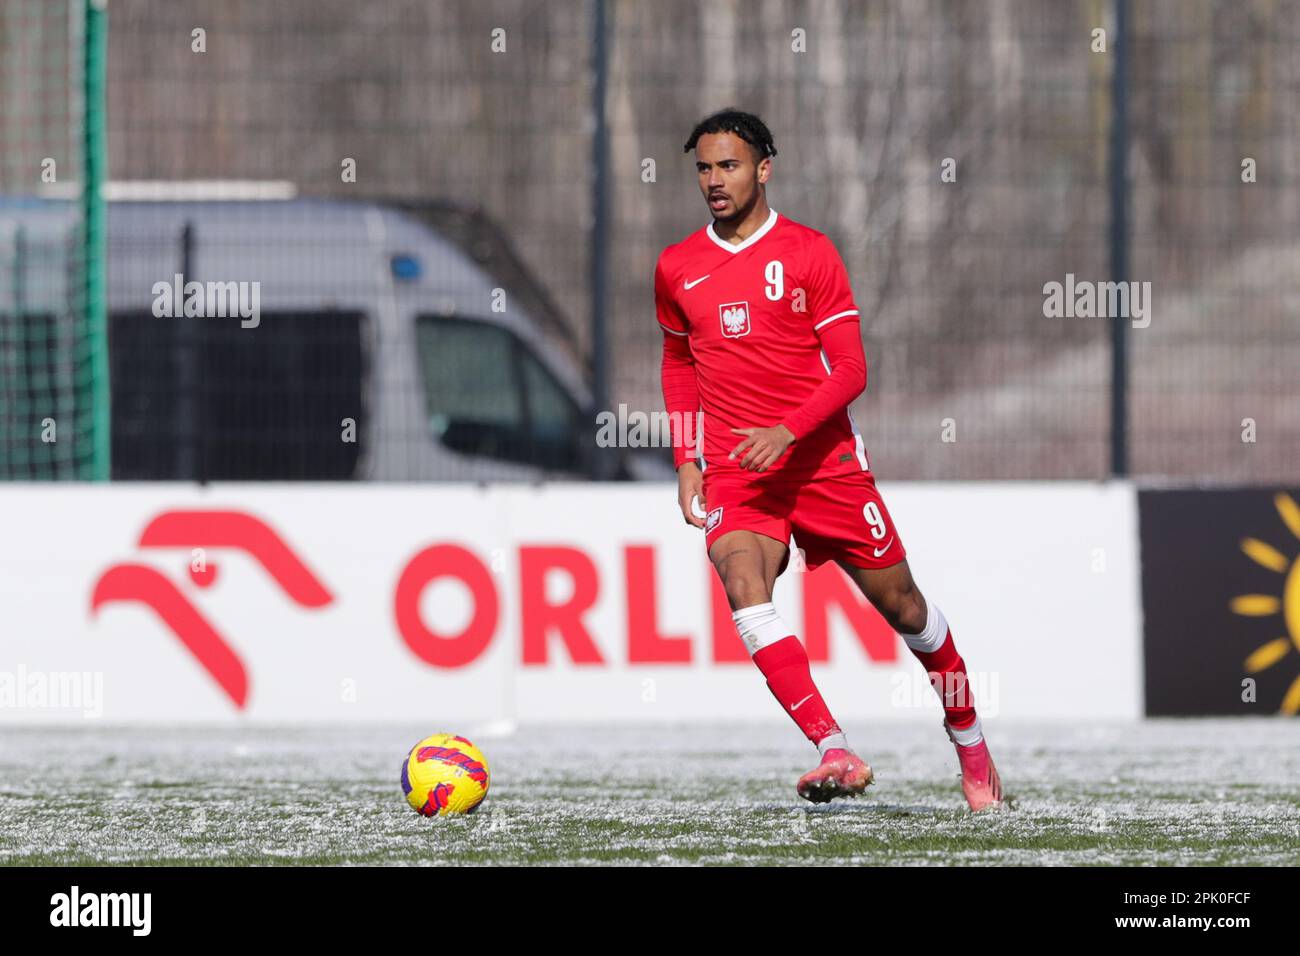 Krakow, Poland. 28th Mar, 2023. Levis Pitan of Poland in action during the European Under-19 Championship 2023-Elite round Match between Poland and Serbia at Cracovia Training Center